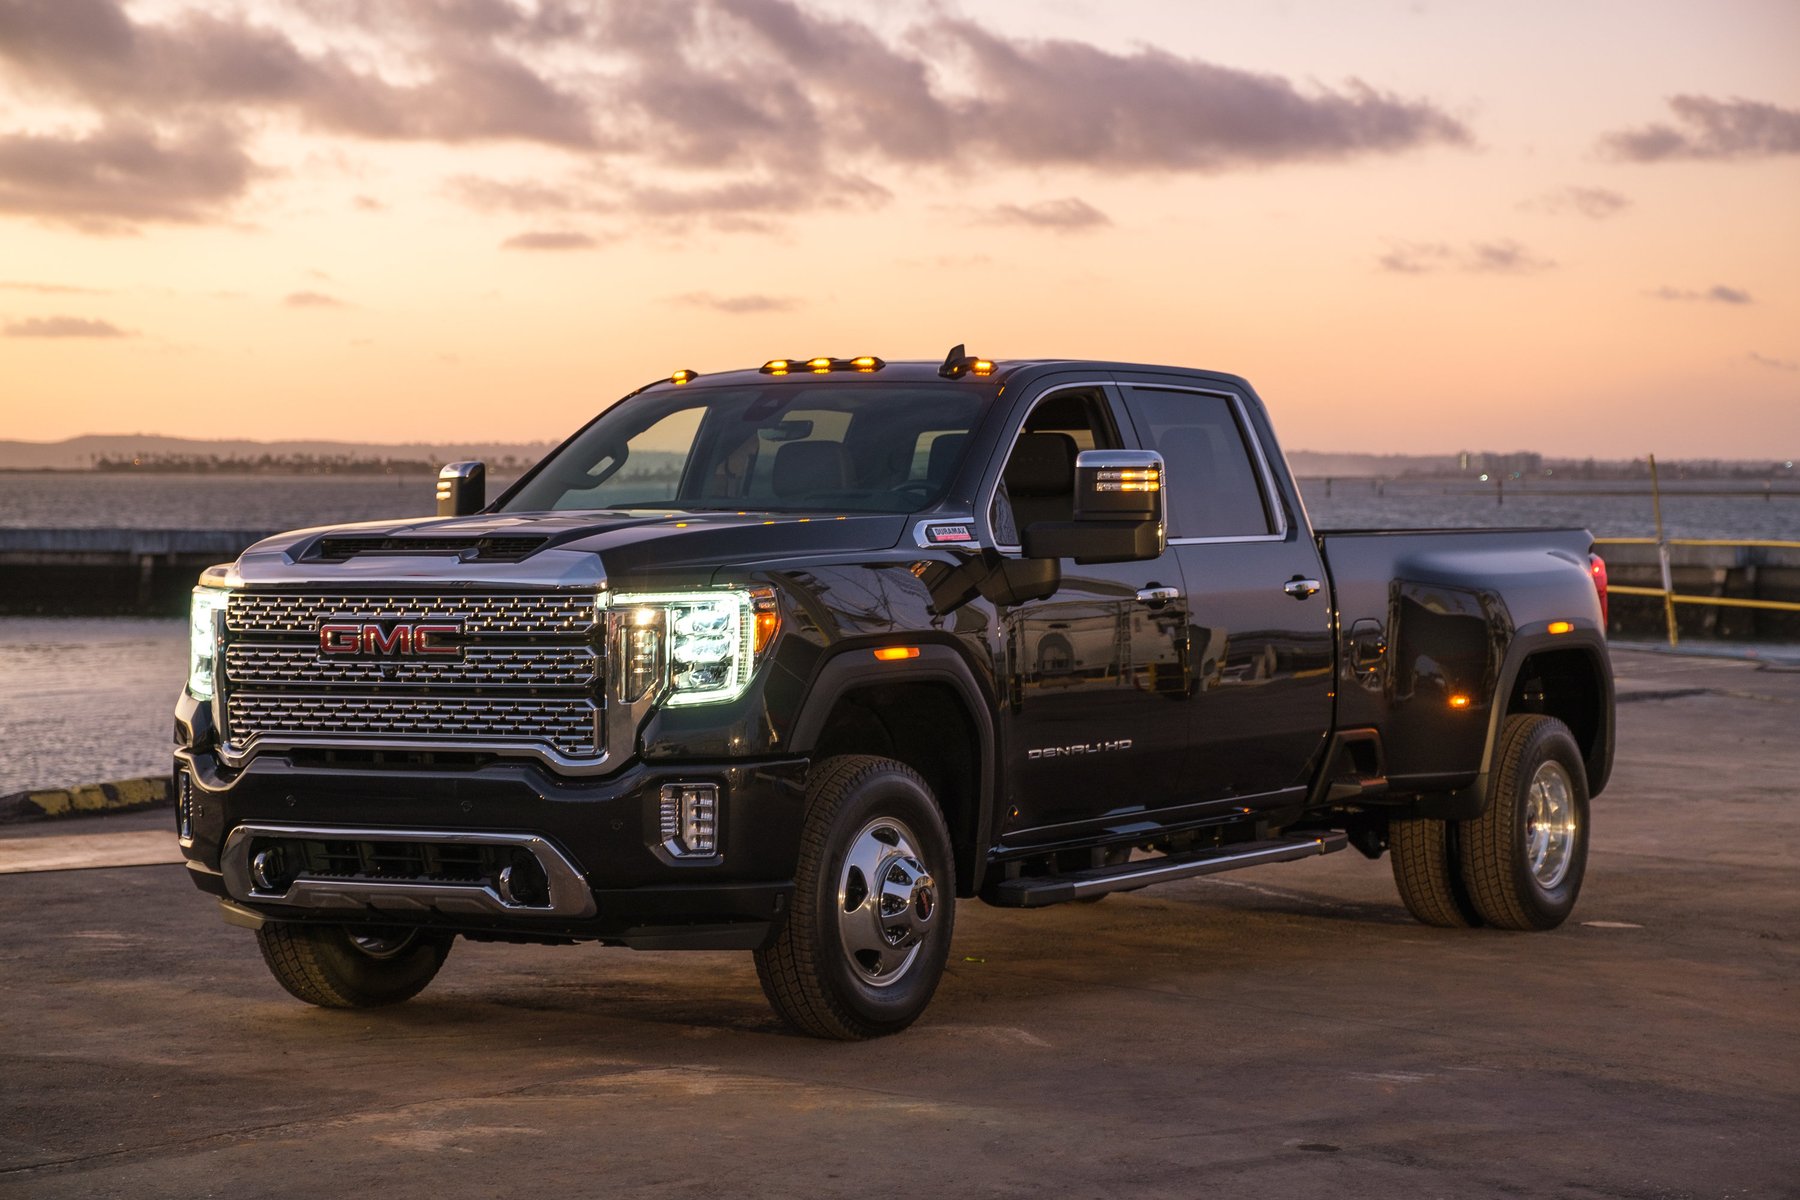 Why You Need GMC Work Trucks in Your Fleet